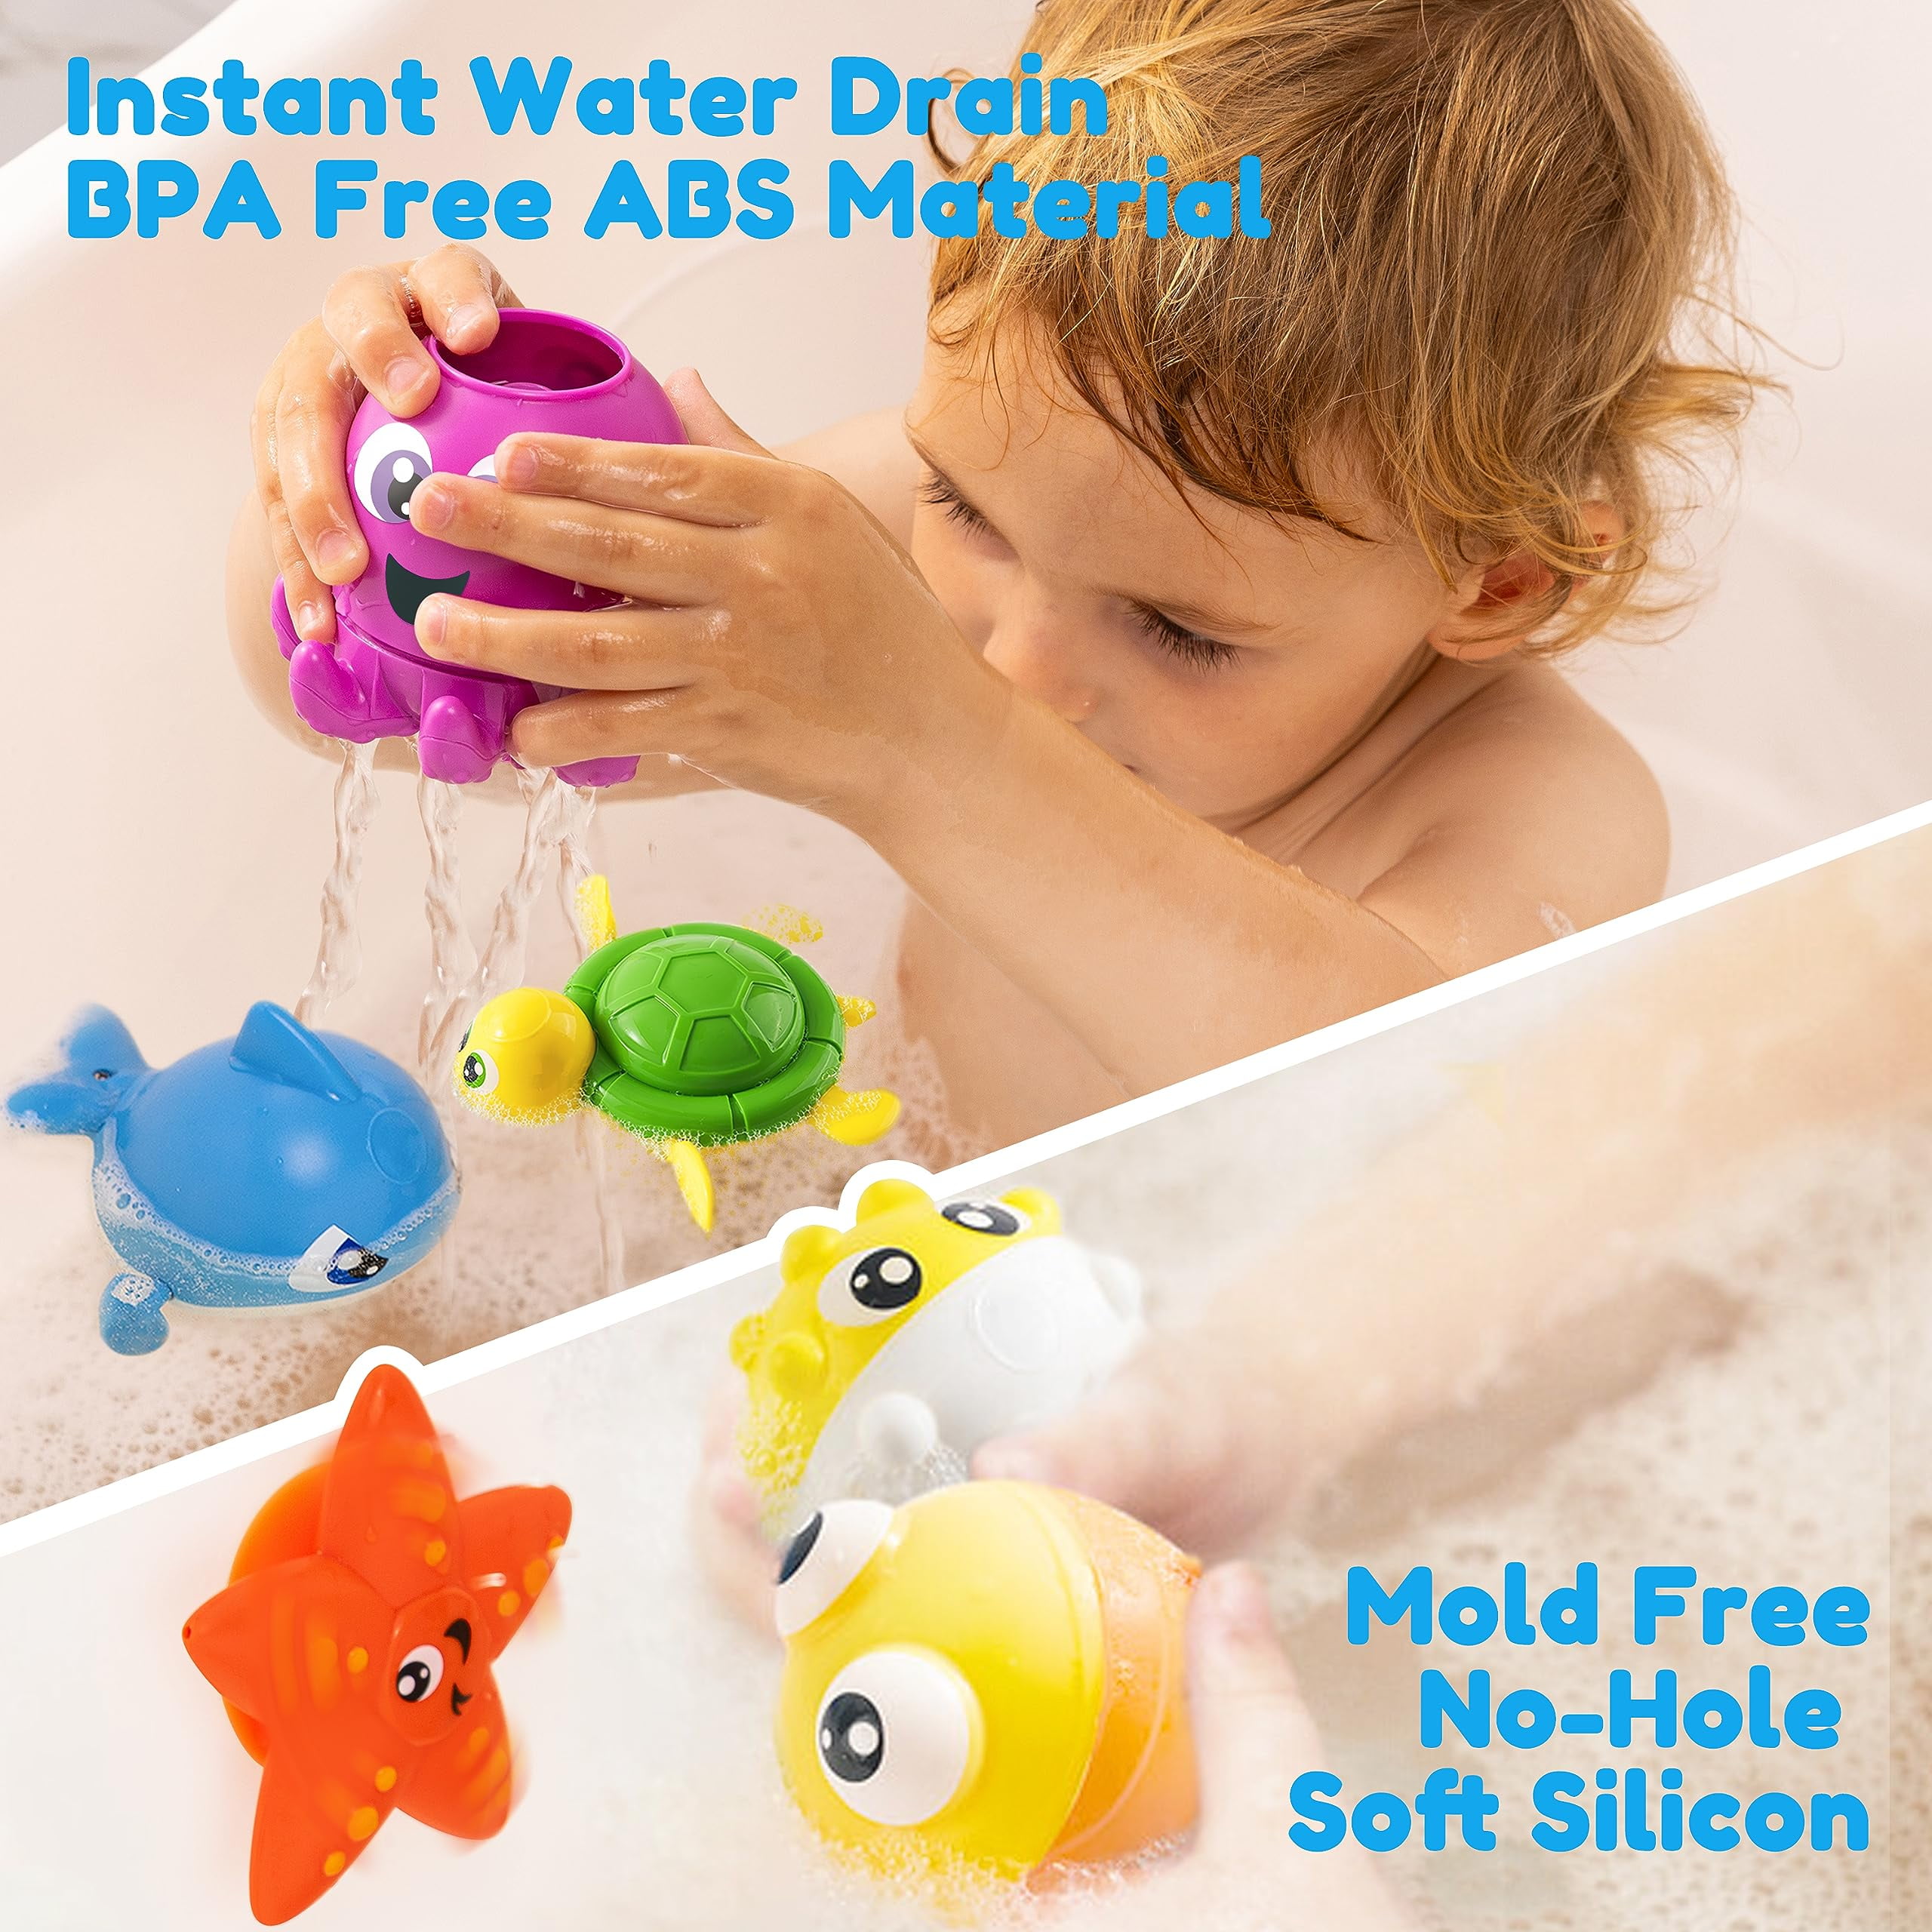  Mold Free Baby Bath Toys for Kids Ages 1-3,No Hole No